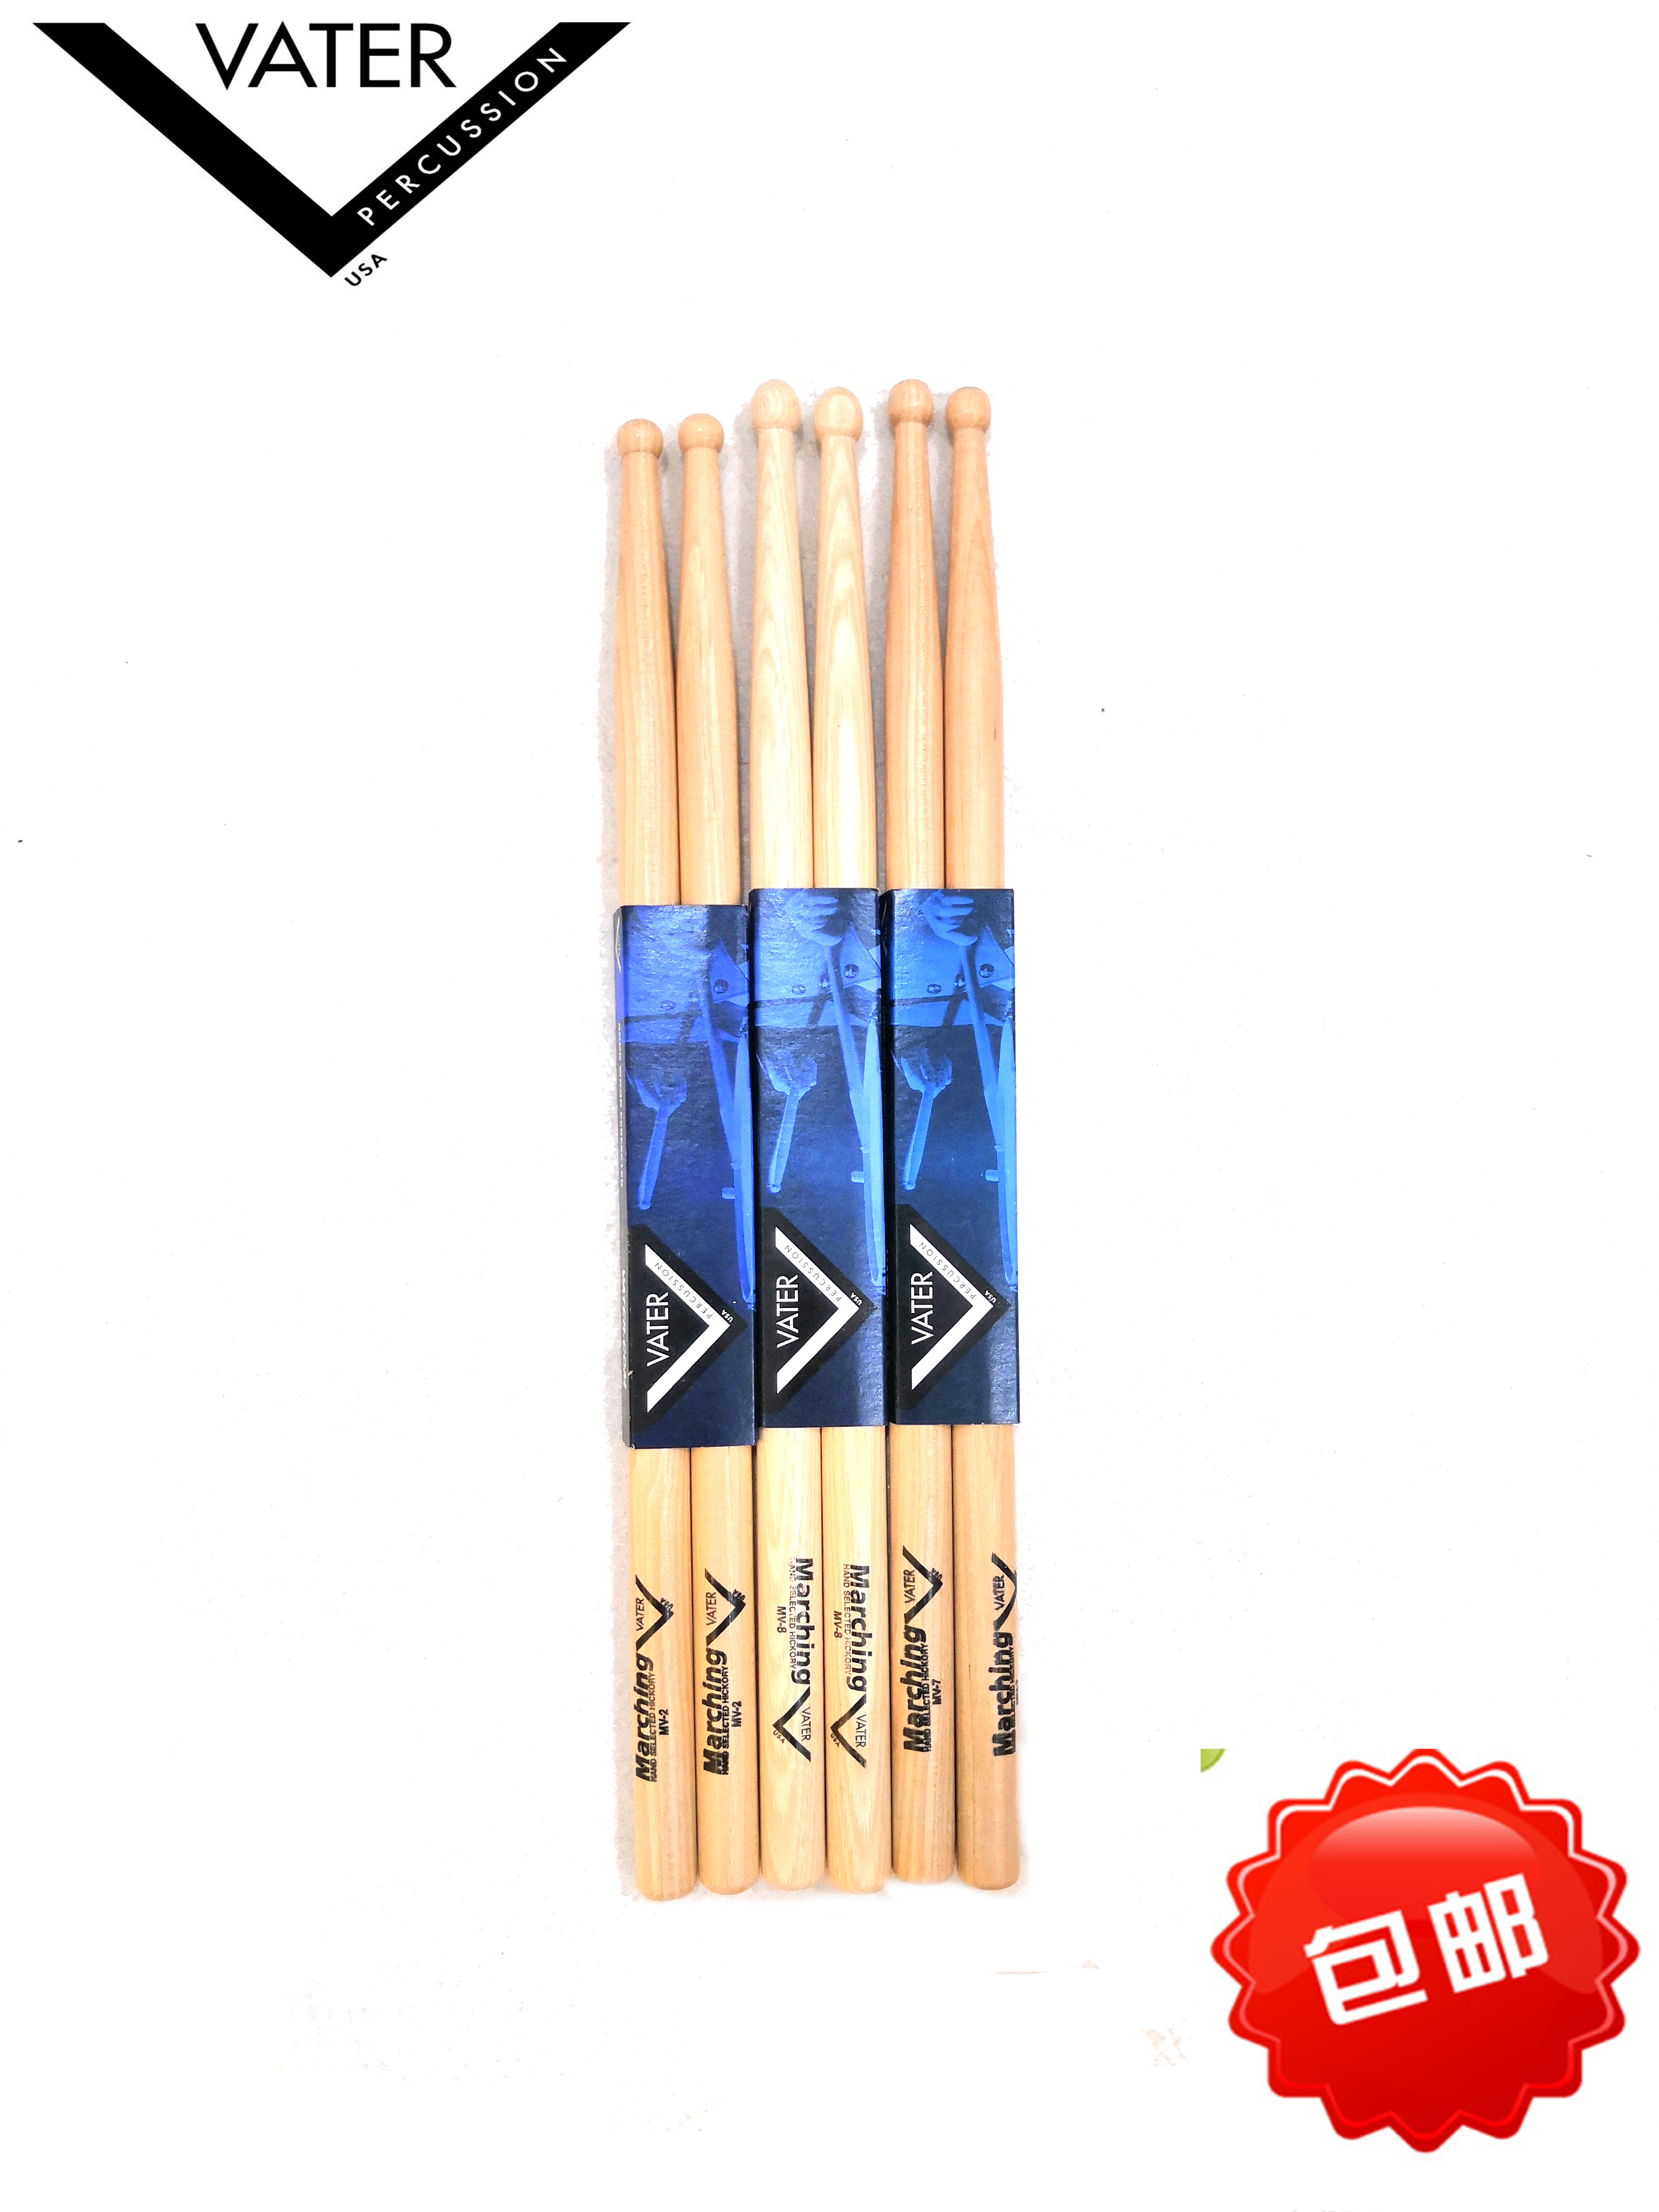 VATER ベーター ドラムスティック Extended Play シリーズ 5A VEP5AW